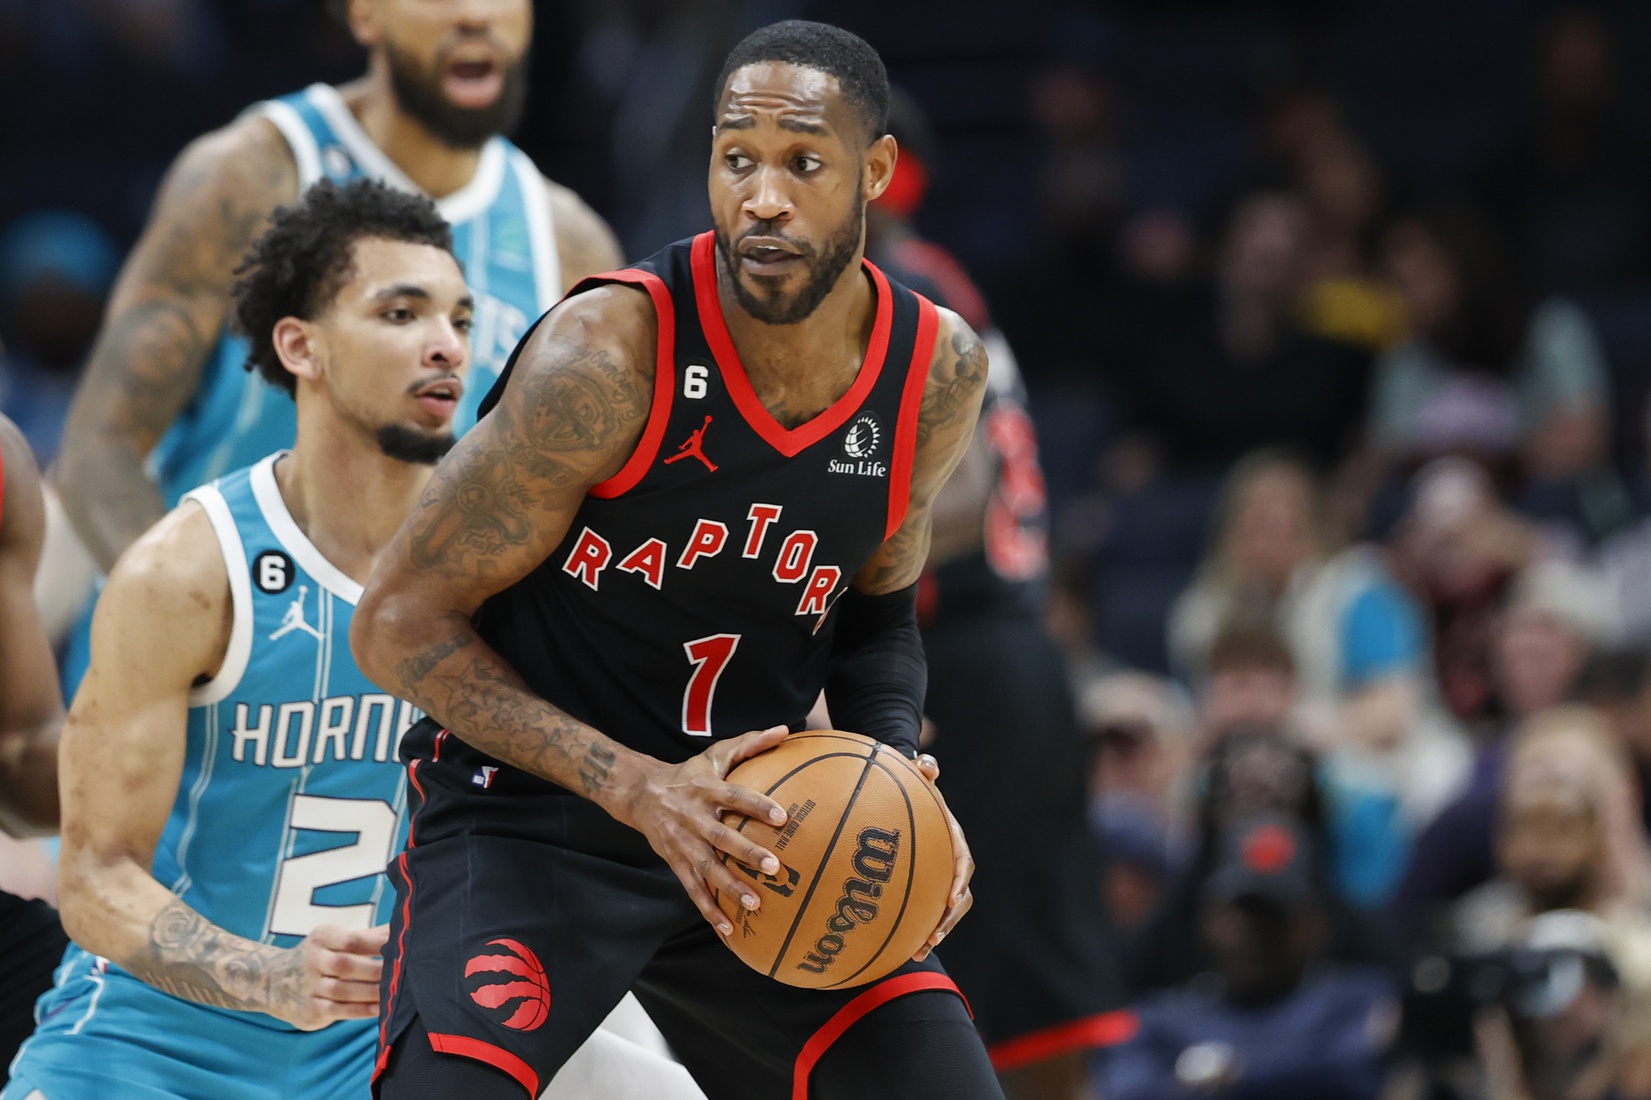 Will Barton is headed to Spain to continue his basketball career.